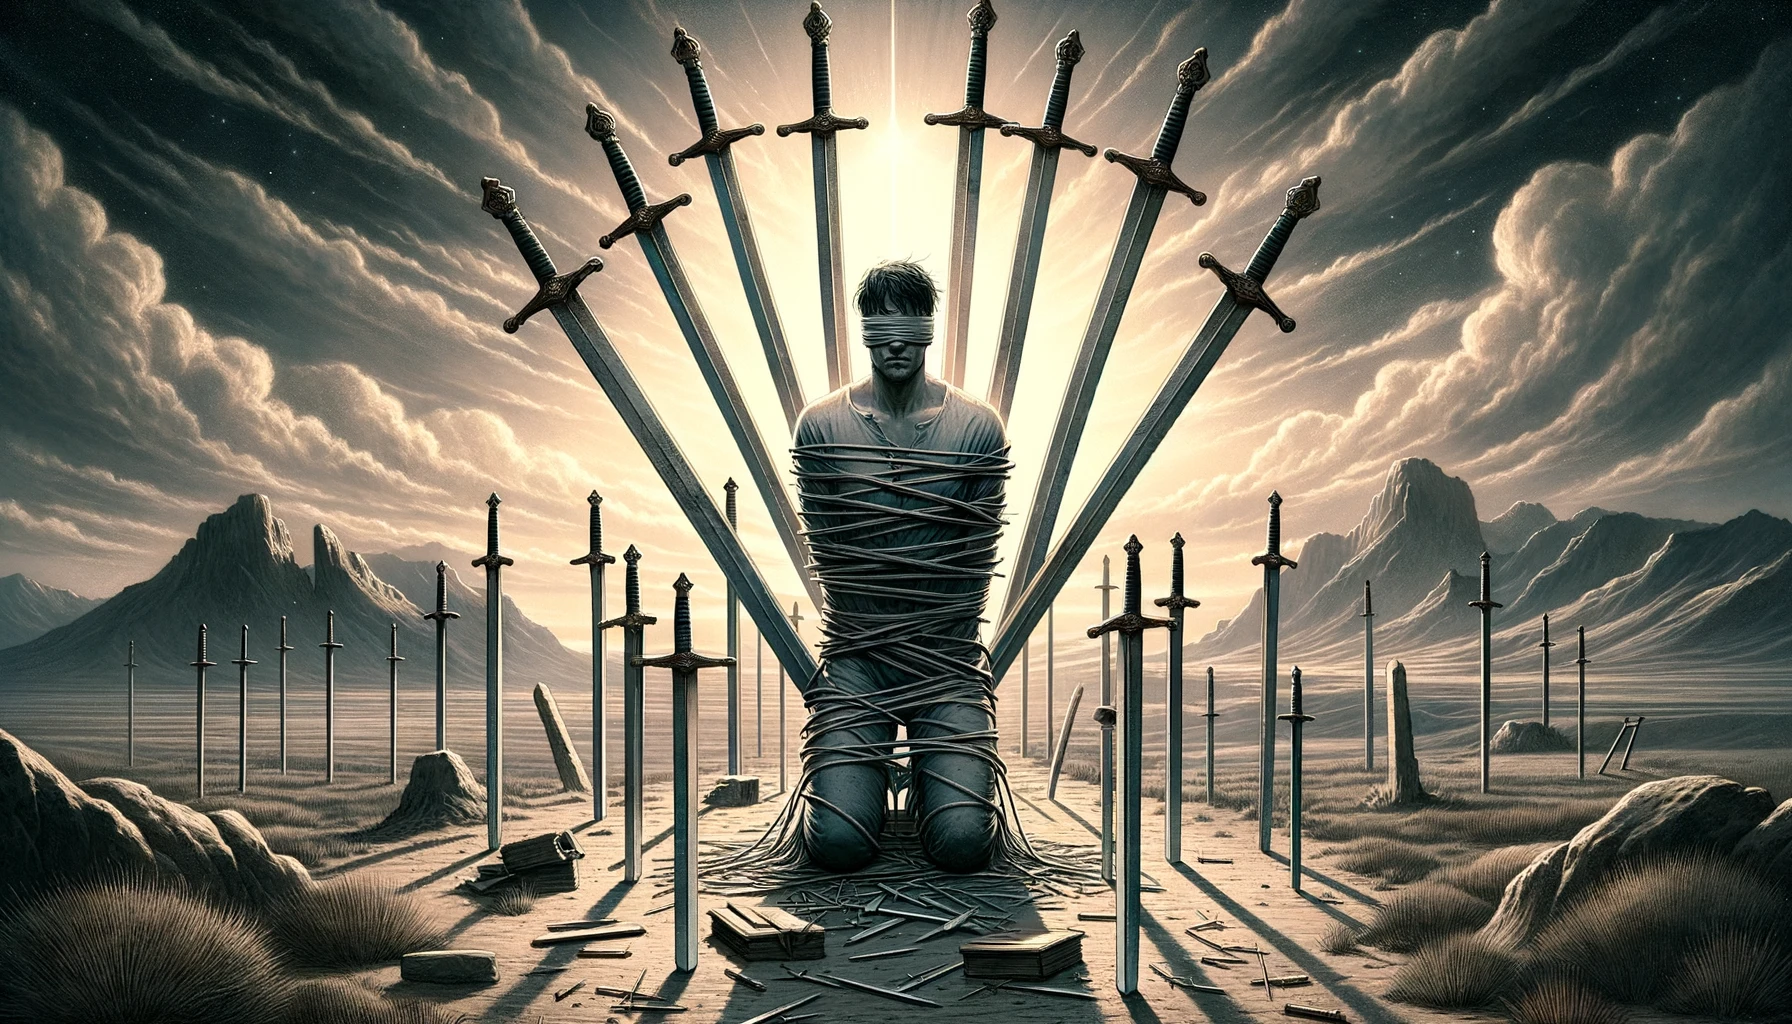 "Illustration portraying a person surrounded by swords, bound and blindfolded, symbolizing feeling trapped, restricted, and overwhelmed by internal conflicts and fears. The image captures the emotional struggle depicted in the Eight of Swords tarot card, emphasizing the journey towards emotional liberation and clarity."